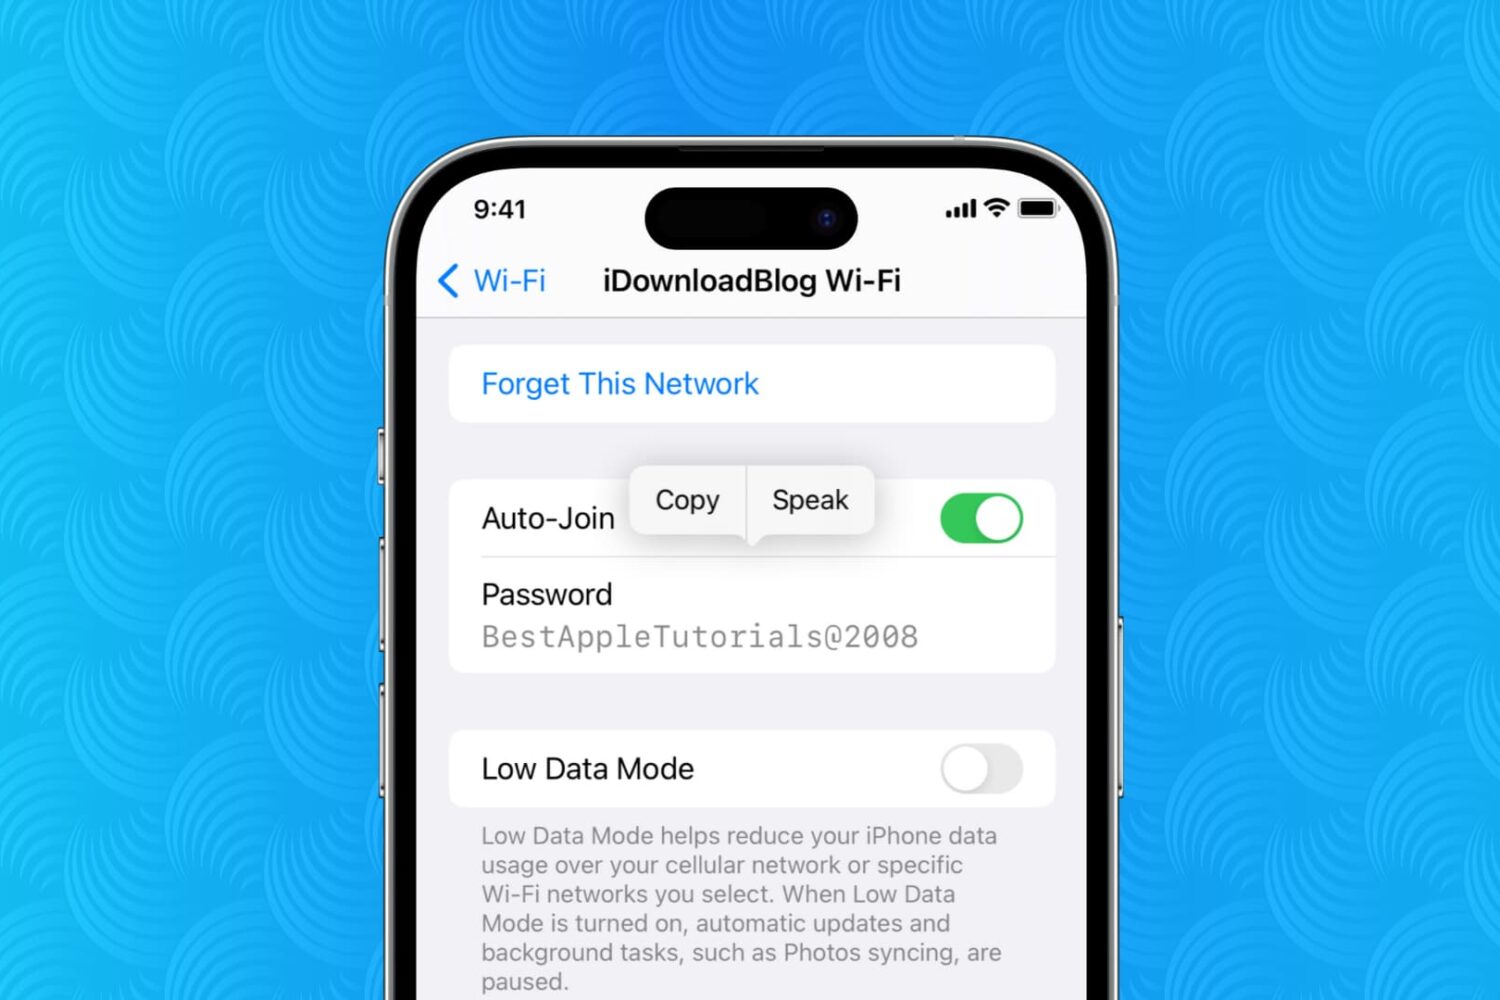 See Wi-Fi password on iPhone from Wi-Fi settings